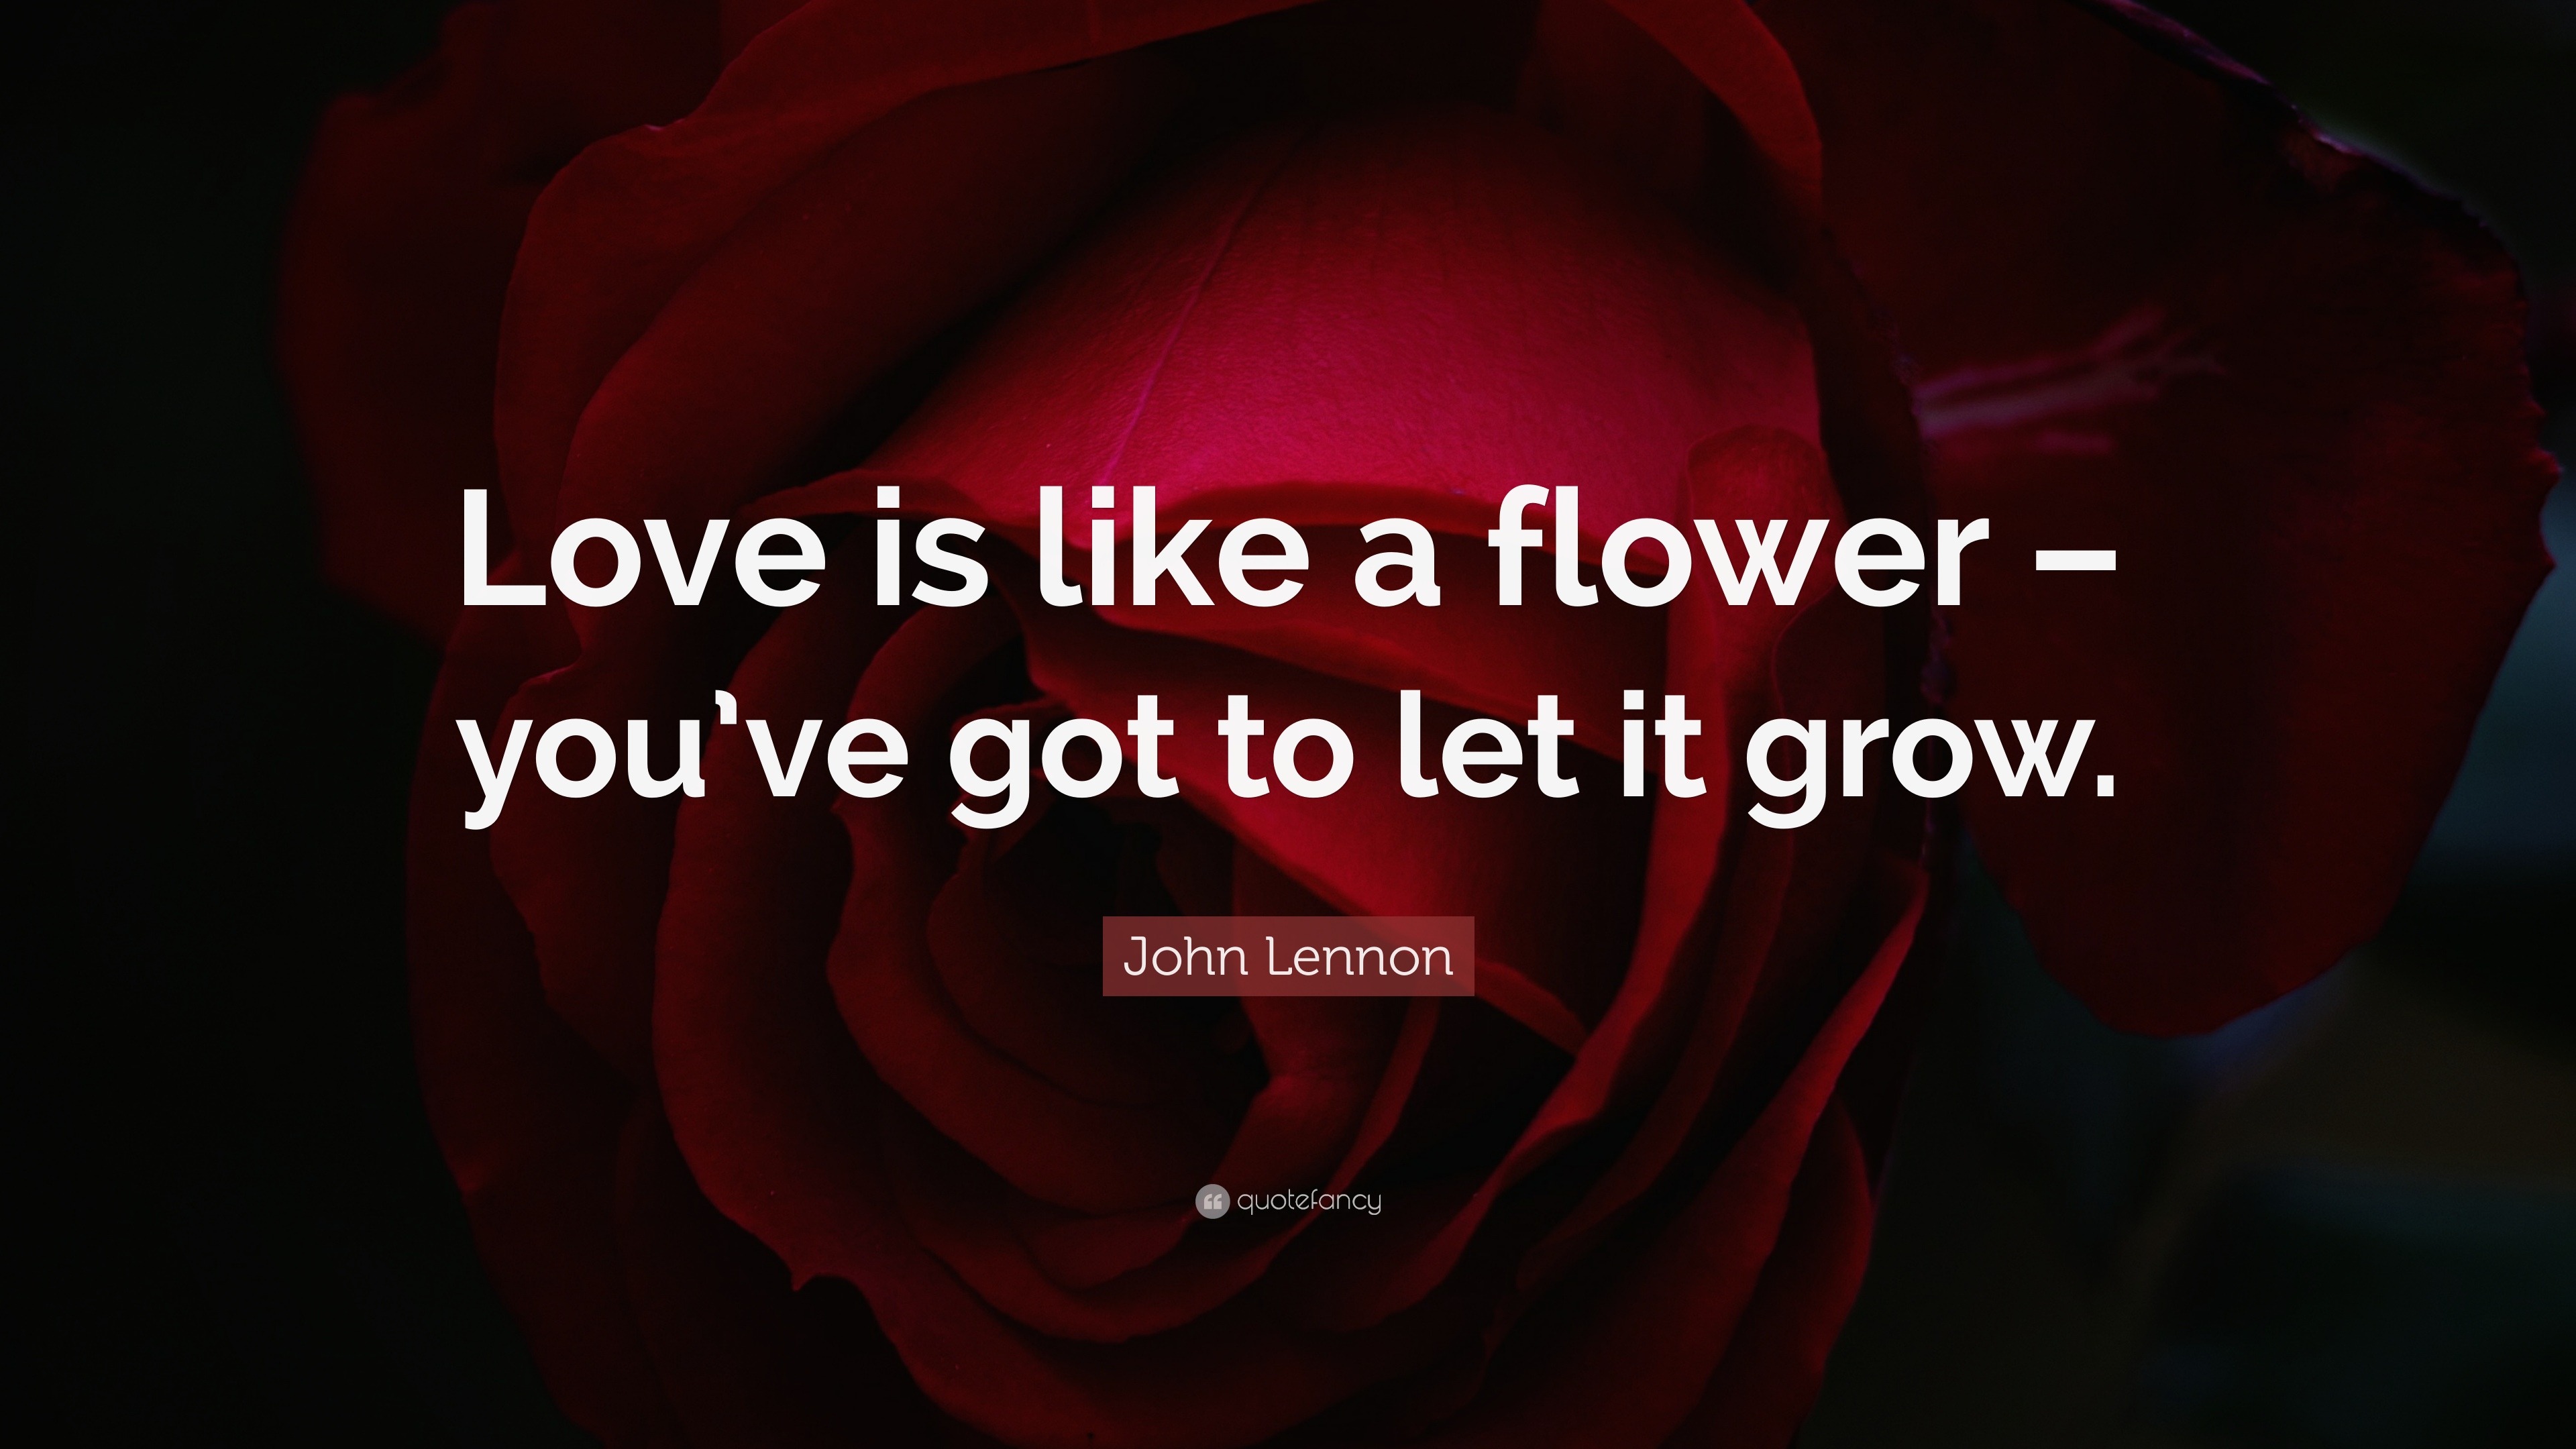 John Lennon Quote Love Is Like A Flower You Ve Got To Let It Grow